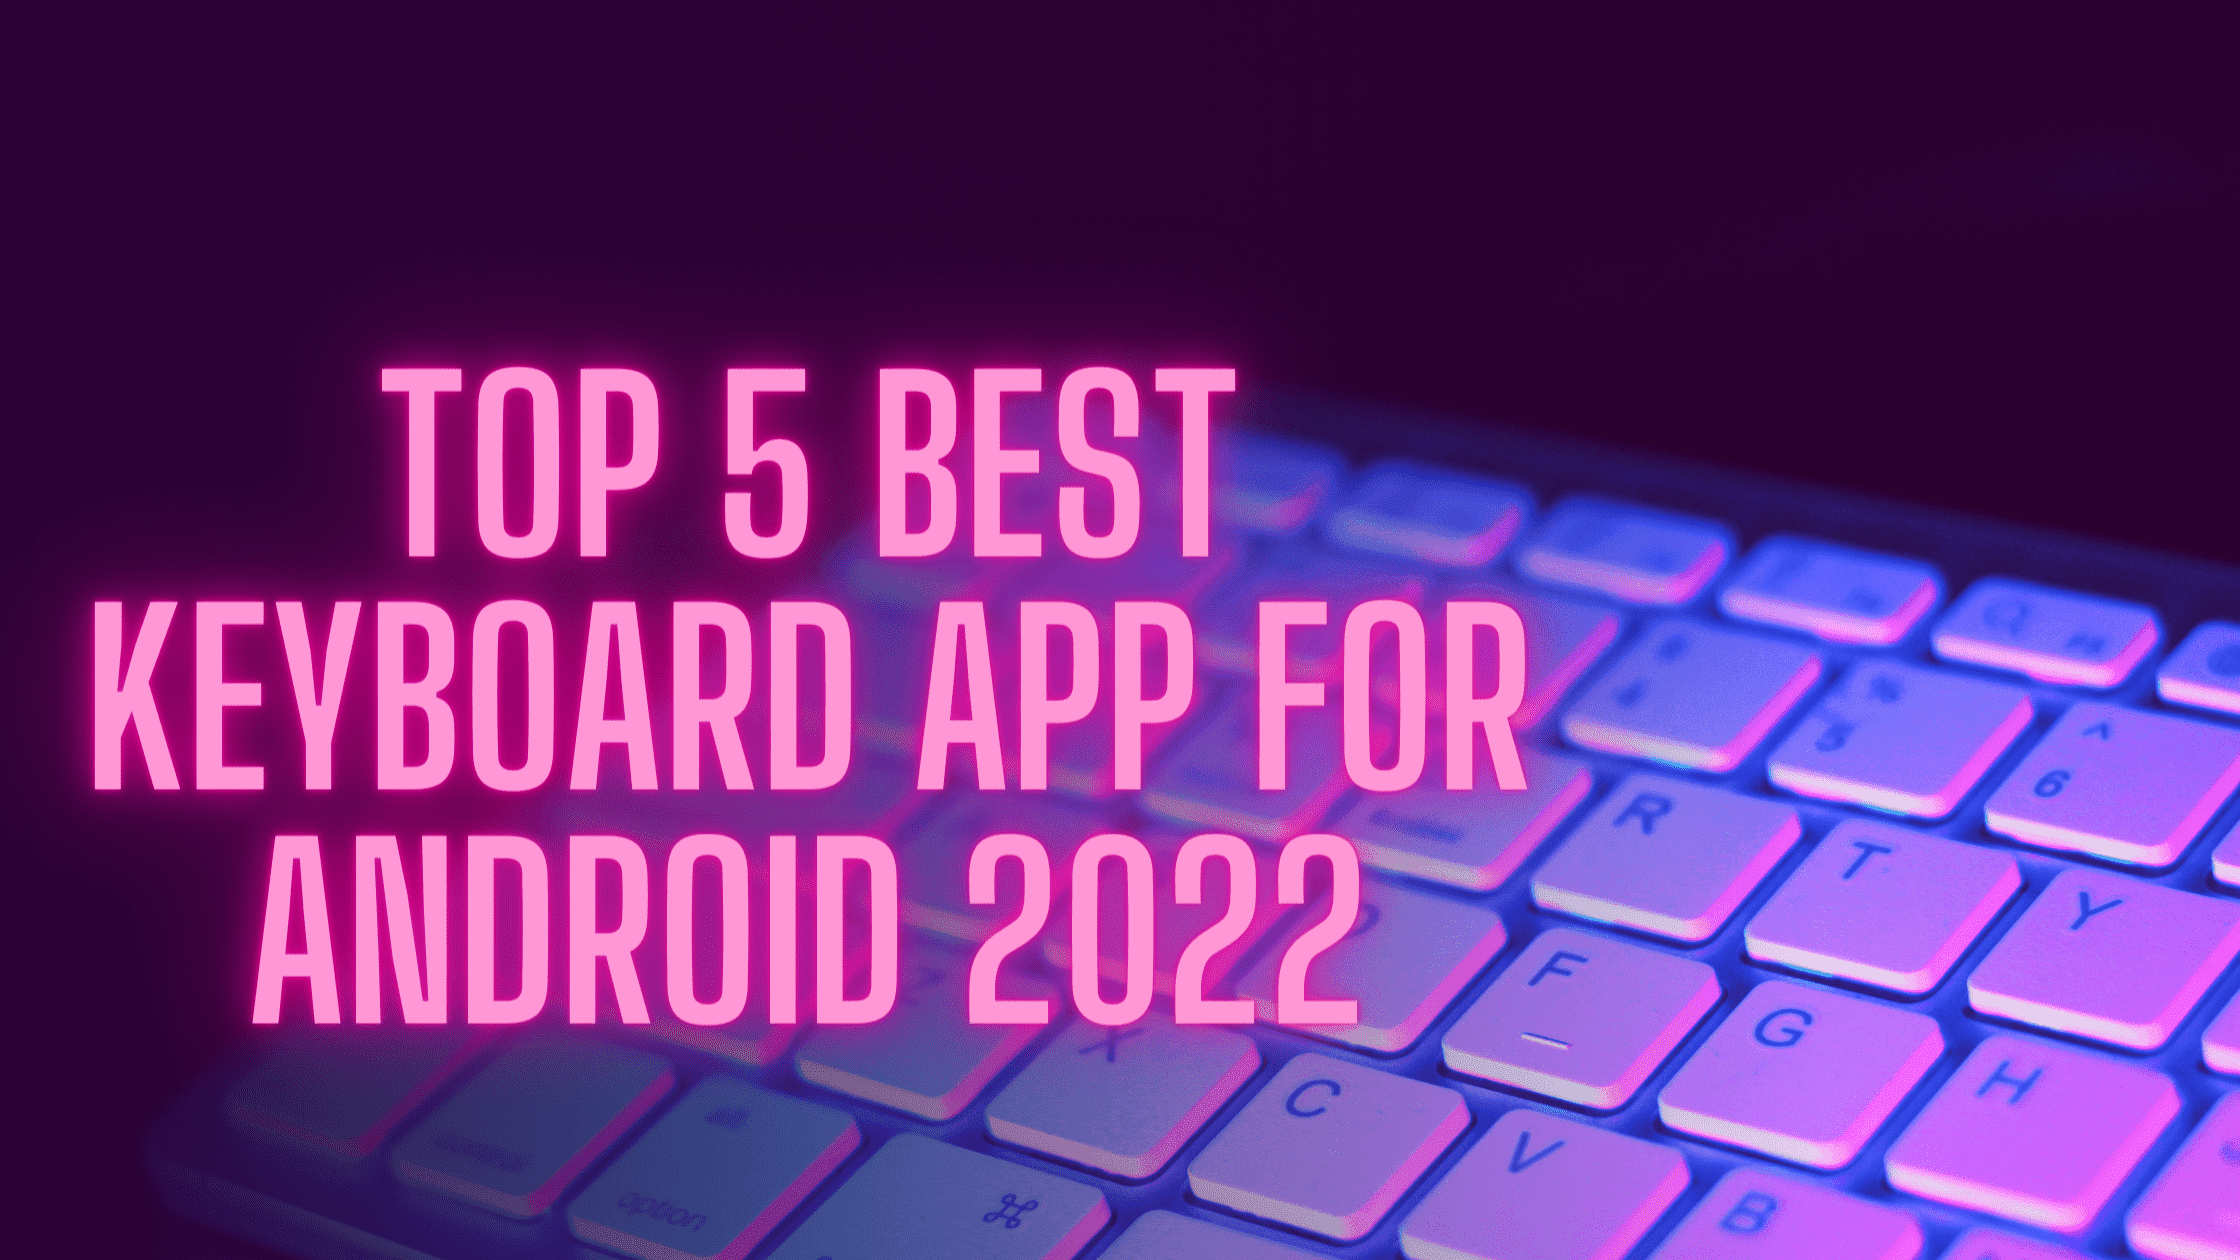 Top 5 Best Keyboard For Android Smartphone 2022